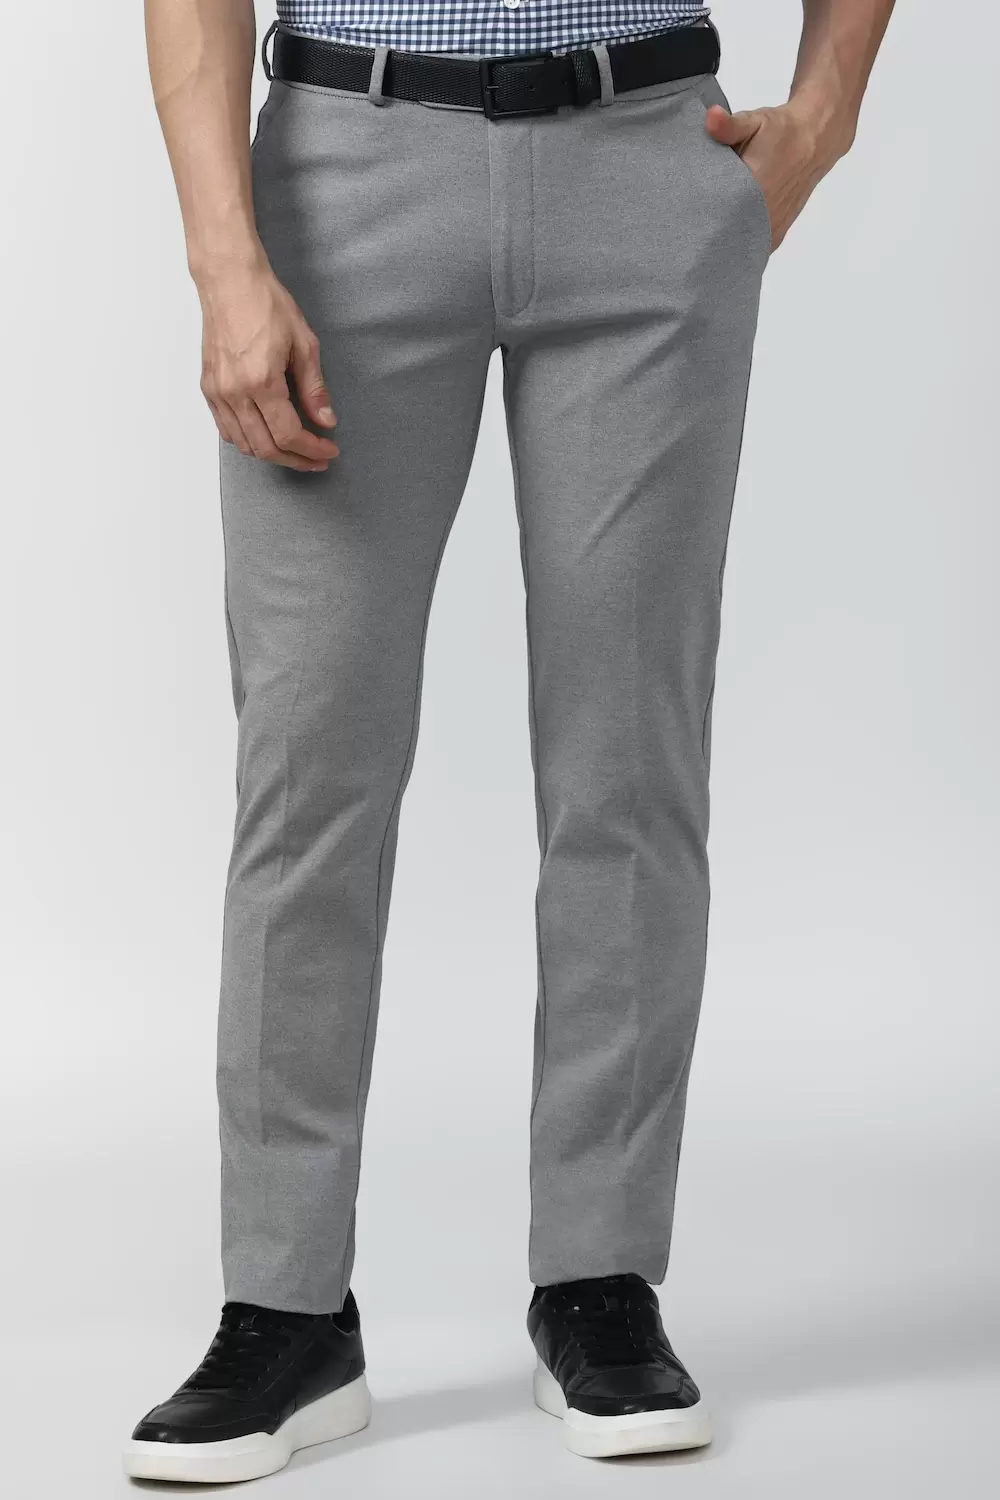  Peter England  Men Grey Solid best Super Slim Fit Casual Trousers